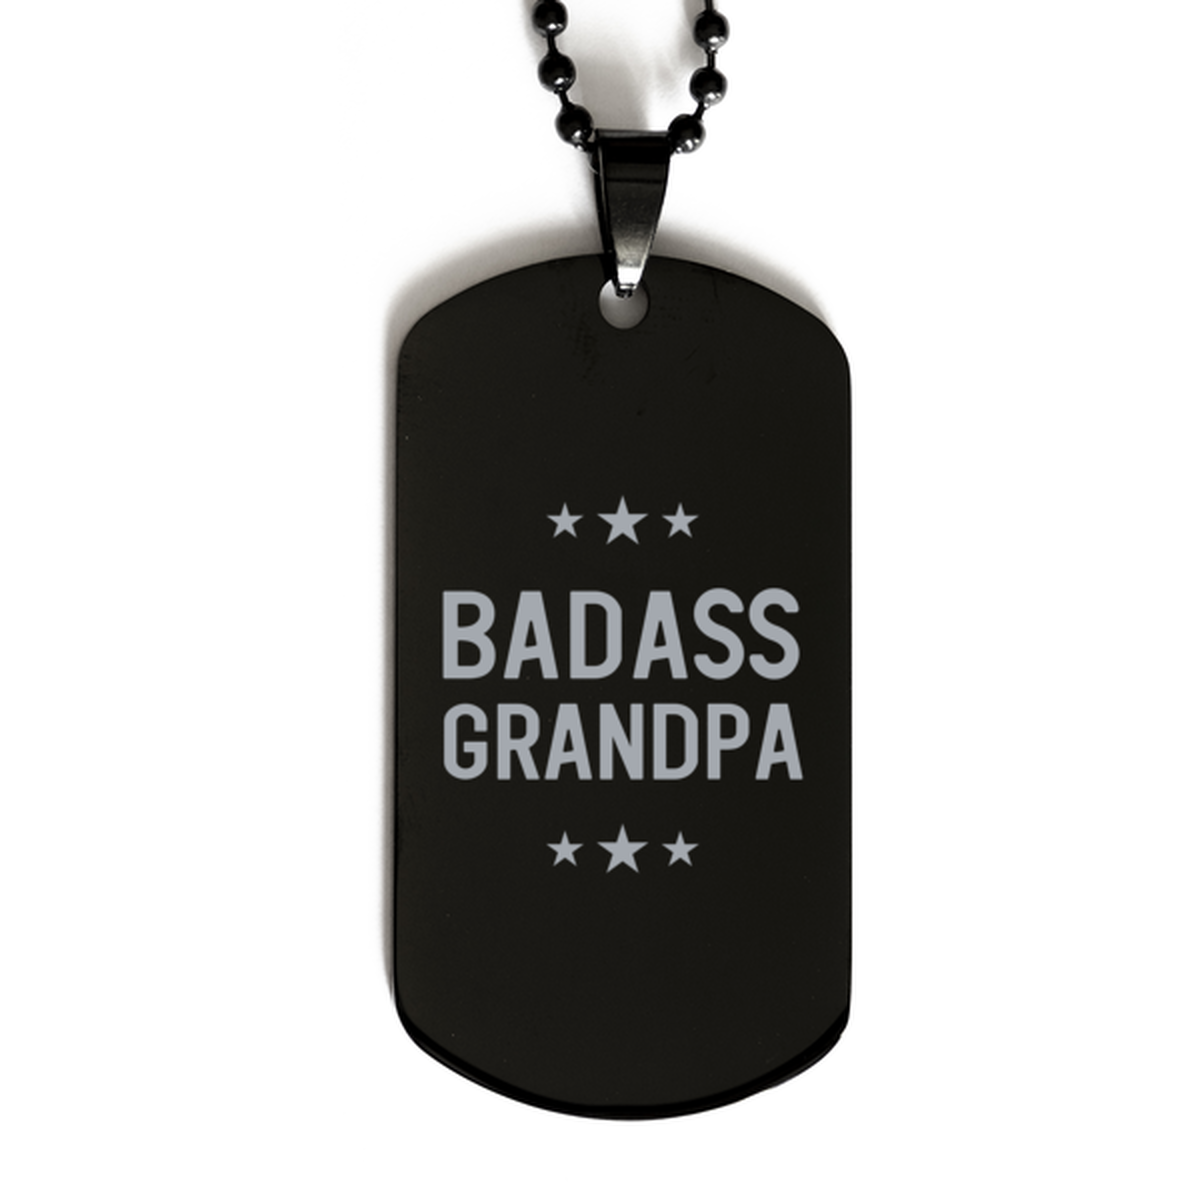 Grandpa Black Dog Tag, Badass Grandpa, Funny Family Gifts  Necklace For Grandpa From Granddaughter Grandson